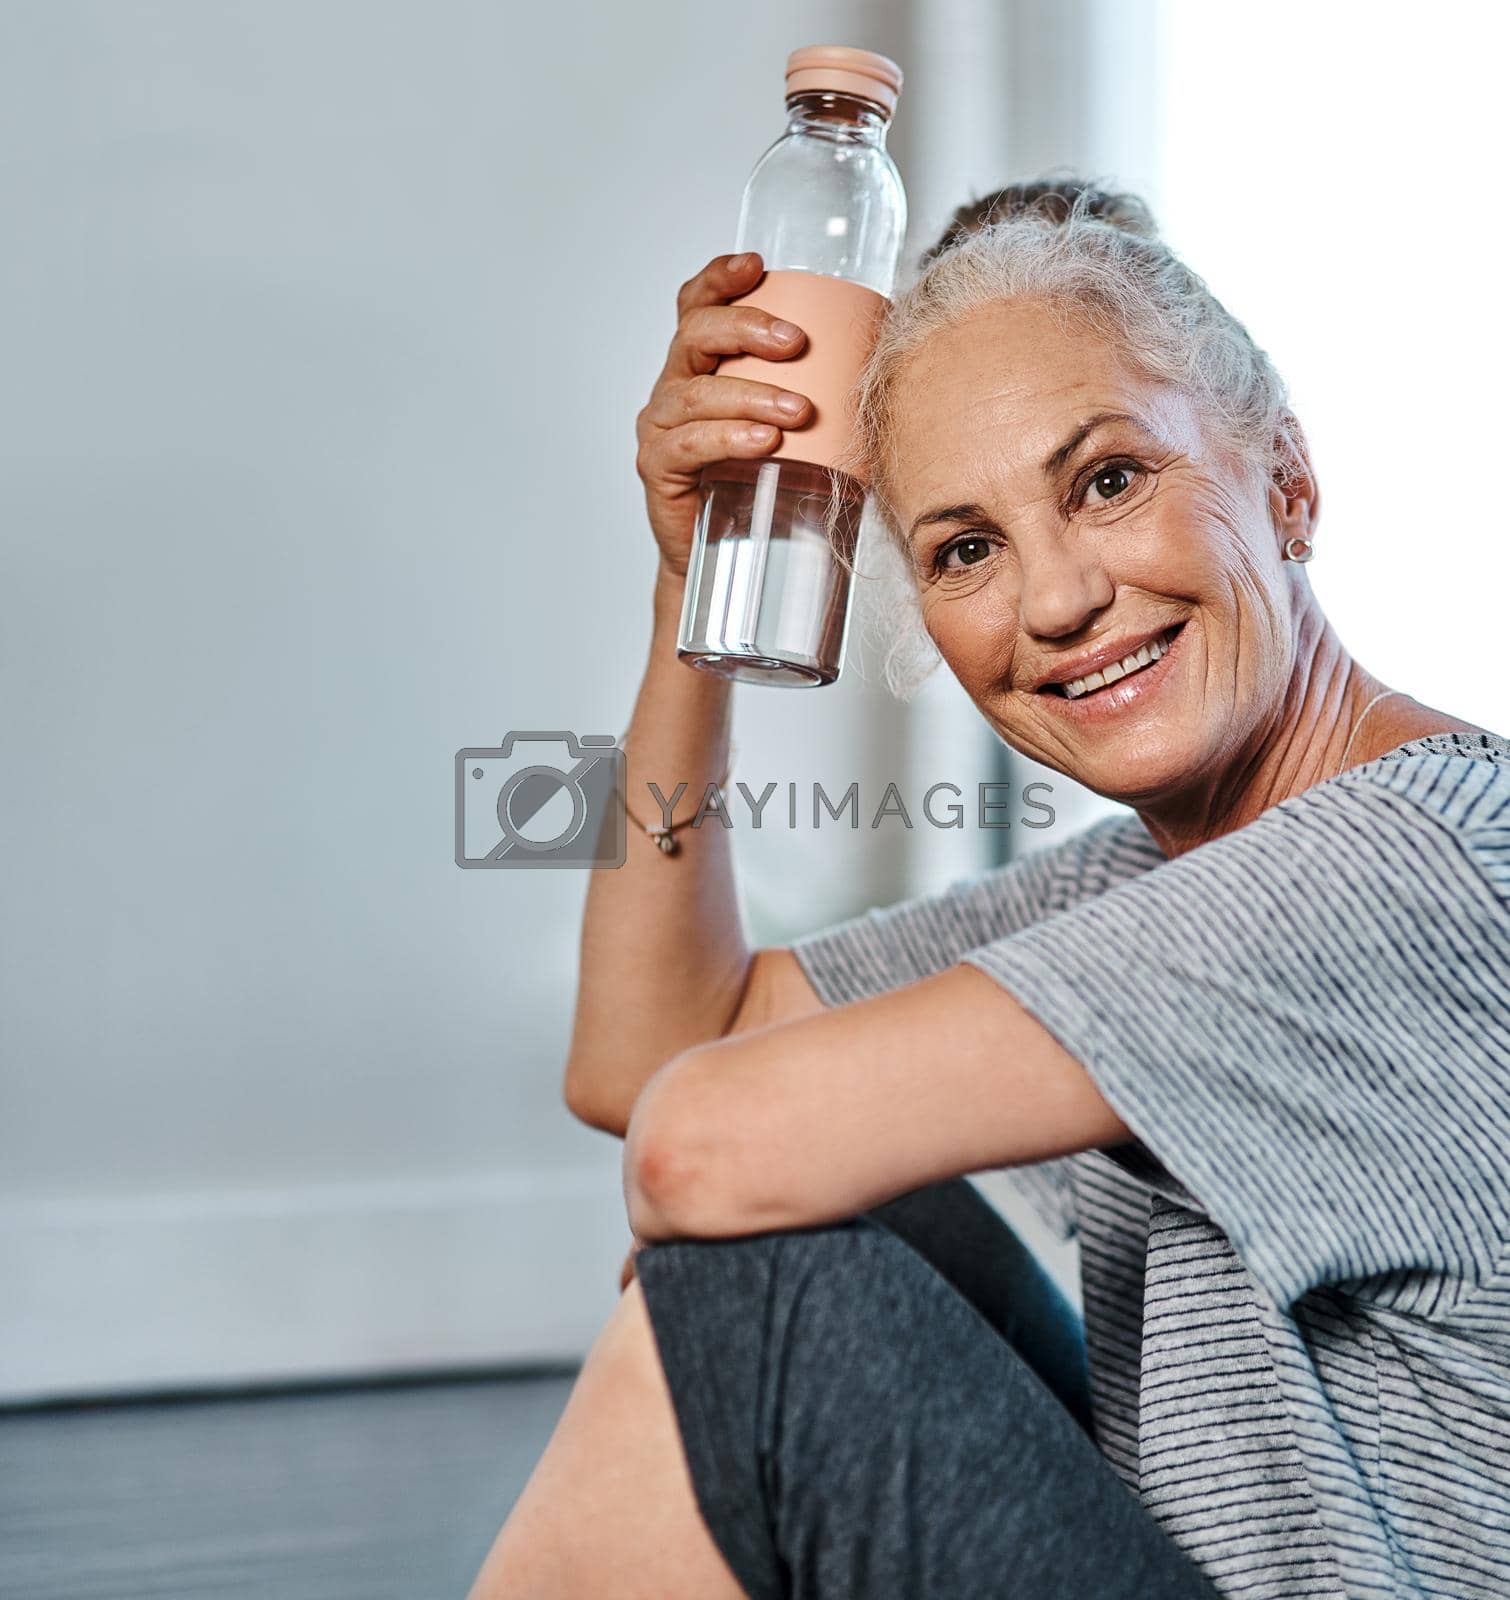 That was a great yoga session. Portrait of a cheerful mature woman practicing yoga while having a drink of water inside of a studio during the day